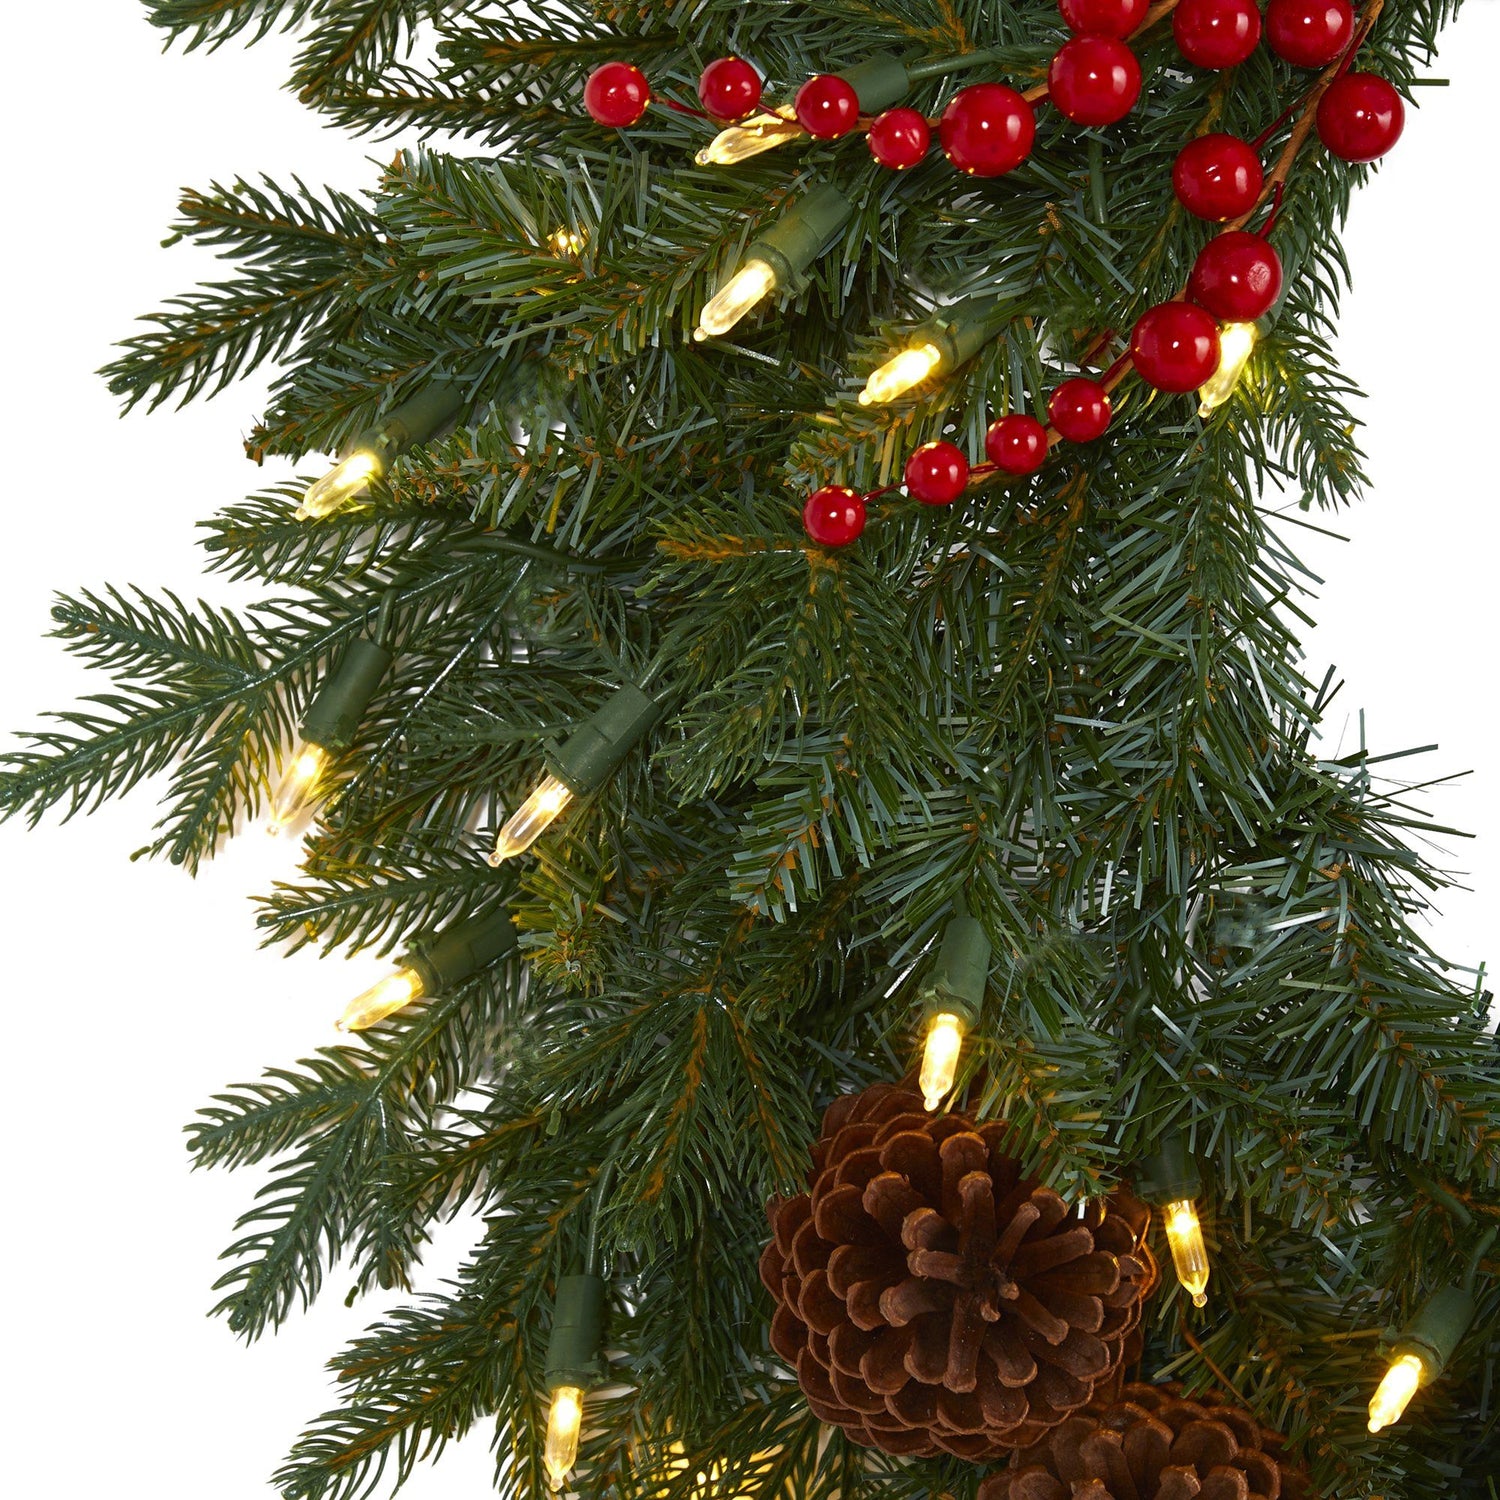 24” Green Pine Artificial Christmas Wreath with 50 Warm White LED Lights, Berries and Pine Cones